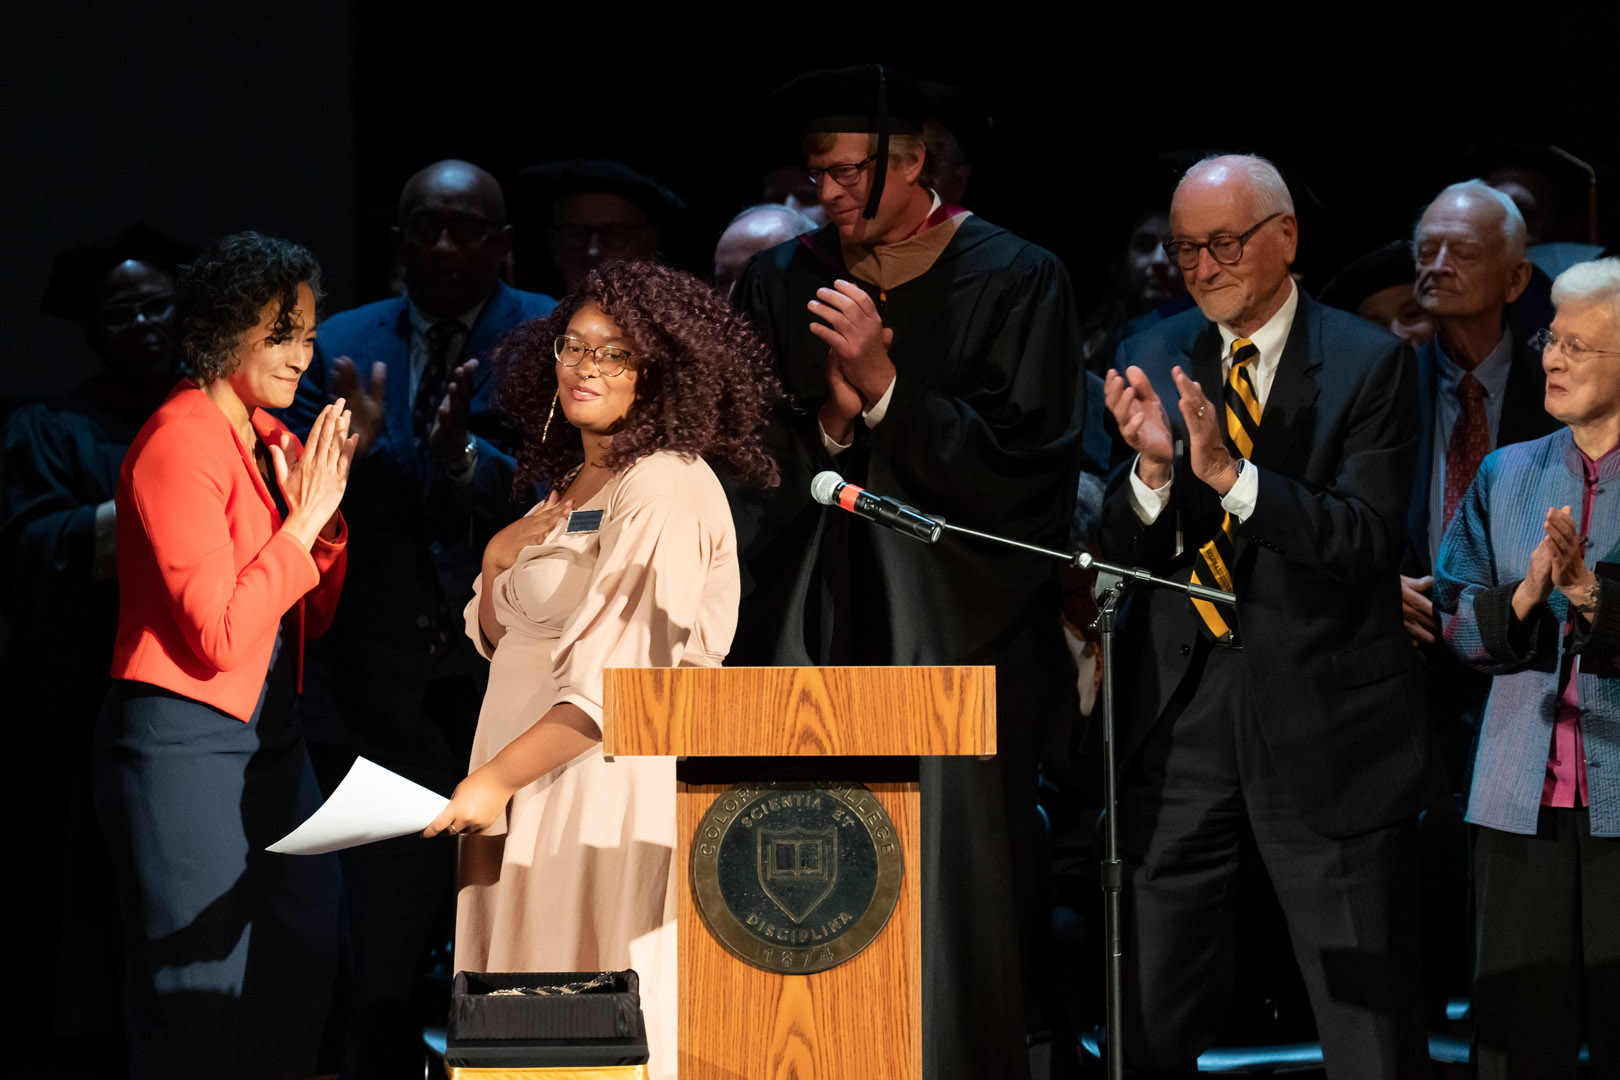 Poet Laureate of the Pikes Peak Region, Ashley Cornelius performed the Inaugural Poem during the Inauguration of L. Song Richardson, the 14th President of Colorado College on Monday, 8/29/22. <span class="cc-gallery-credit">[Photo by Lonnie Timmons III]</span>